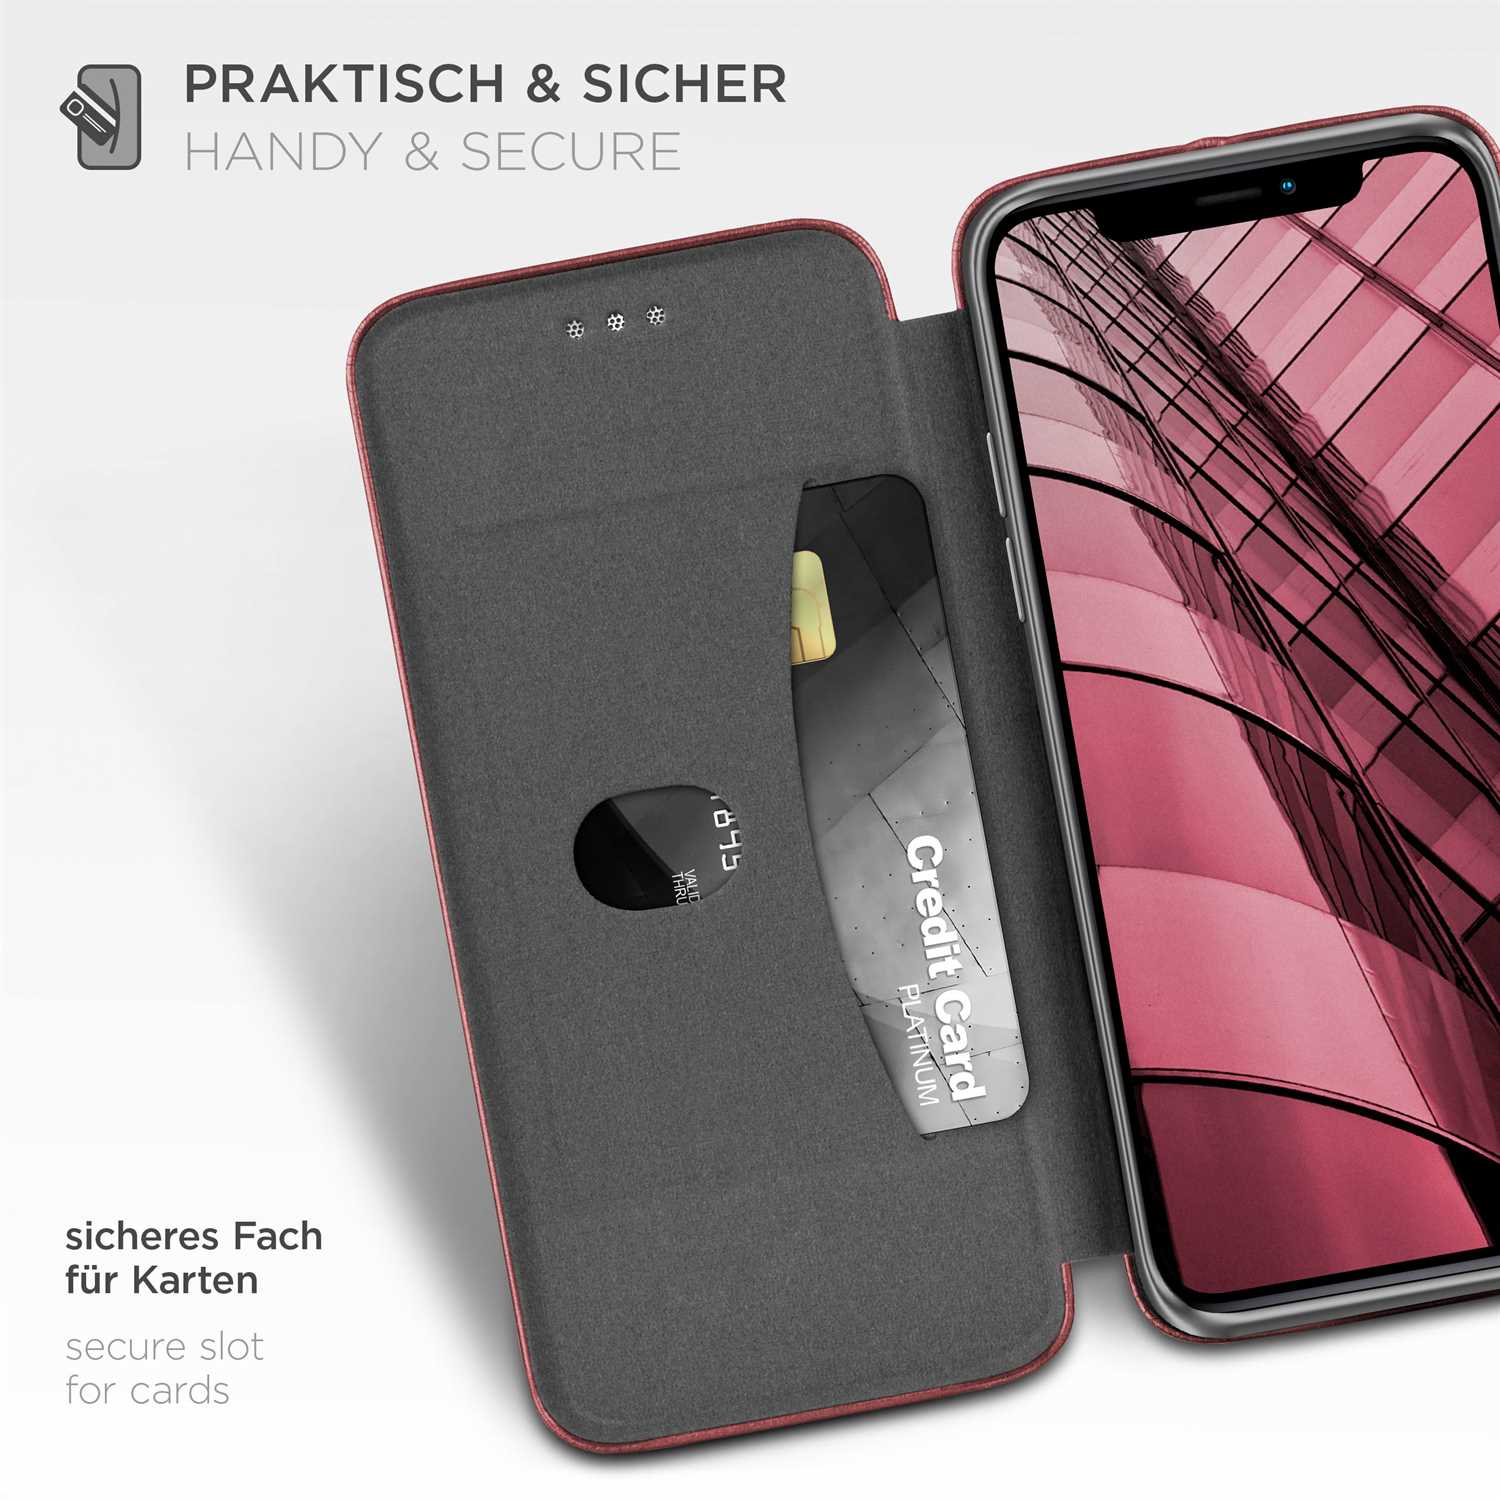 Flip Cover, Pro Apple, - Burgund Red Case, Max, Business ONEFLOW iPhone 11